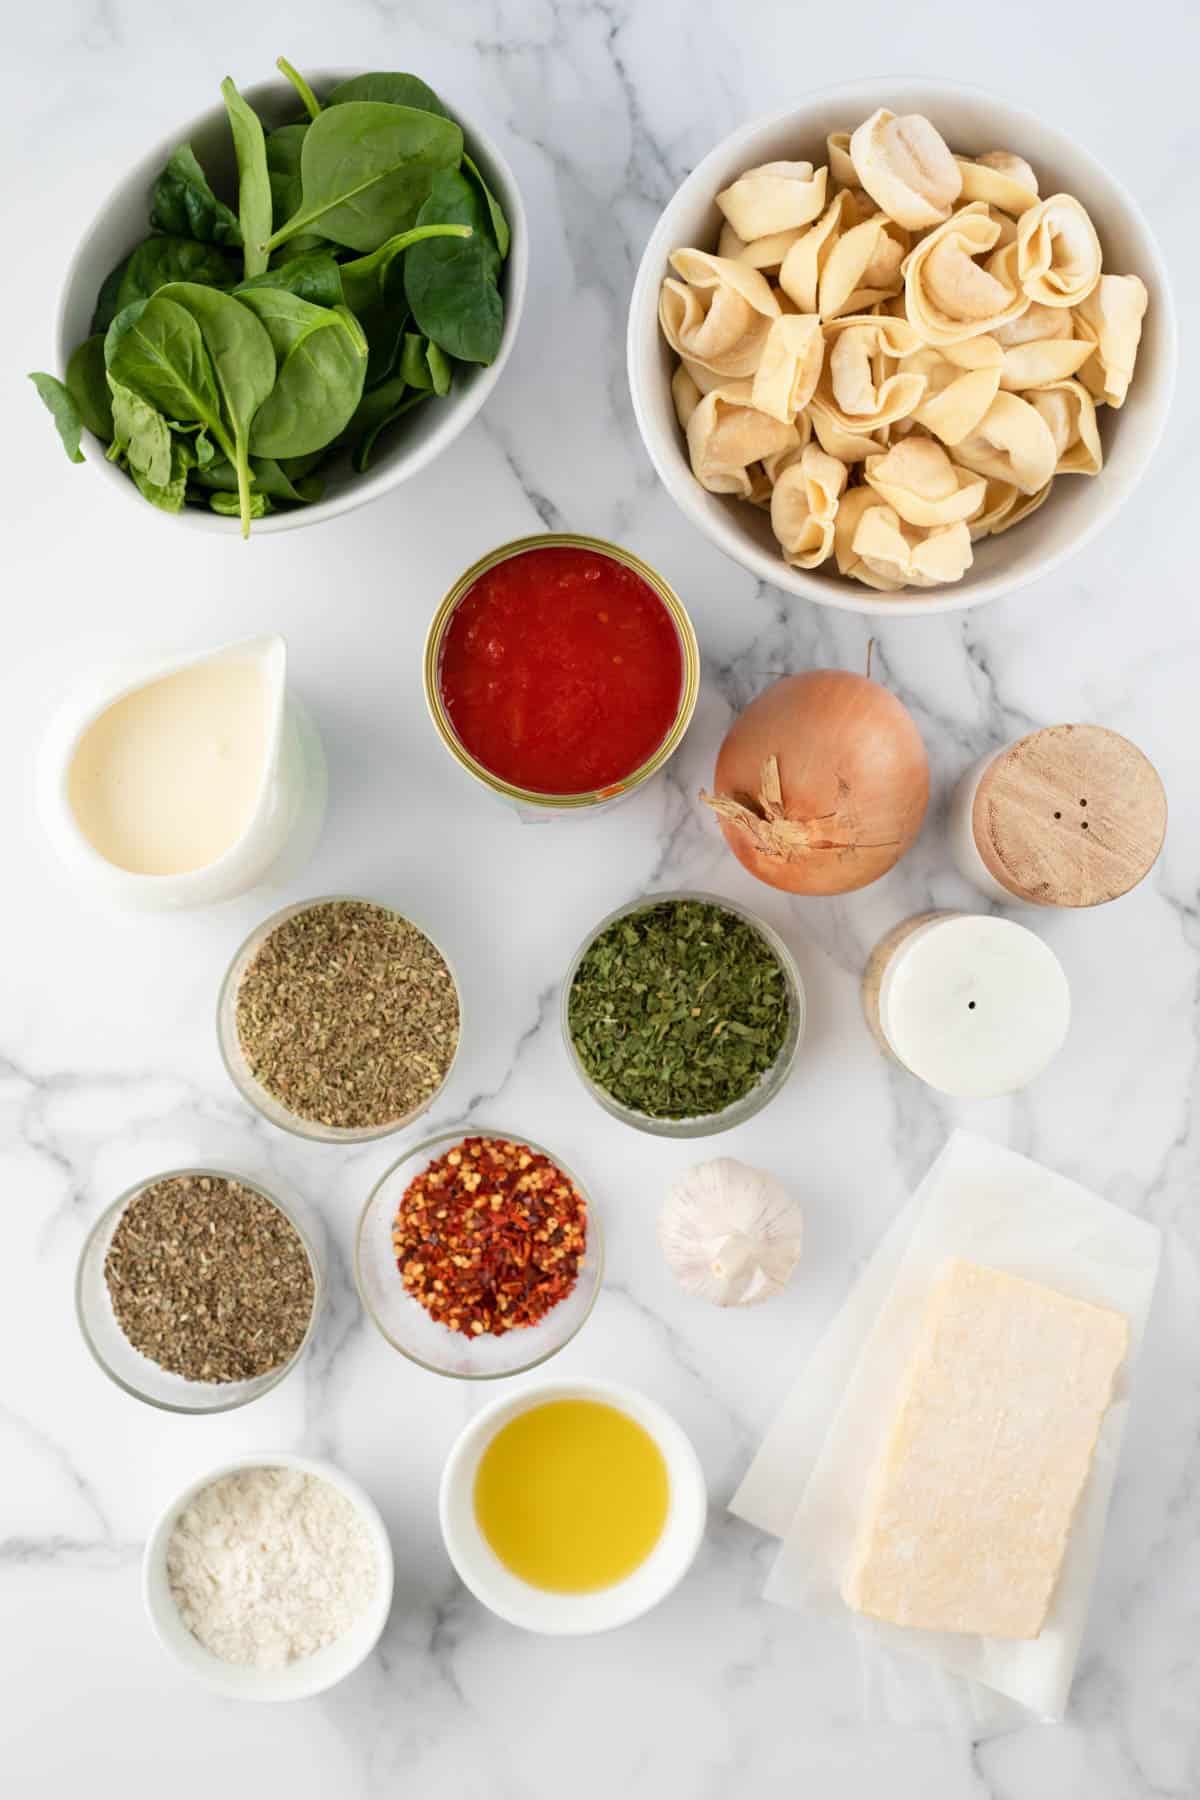 Ingredients for making creamy tomato and spinach tortellini.